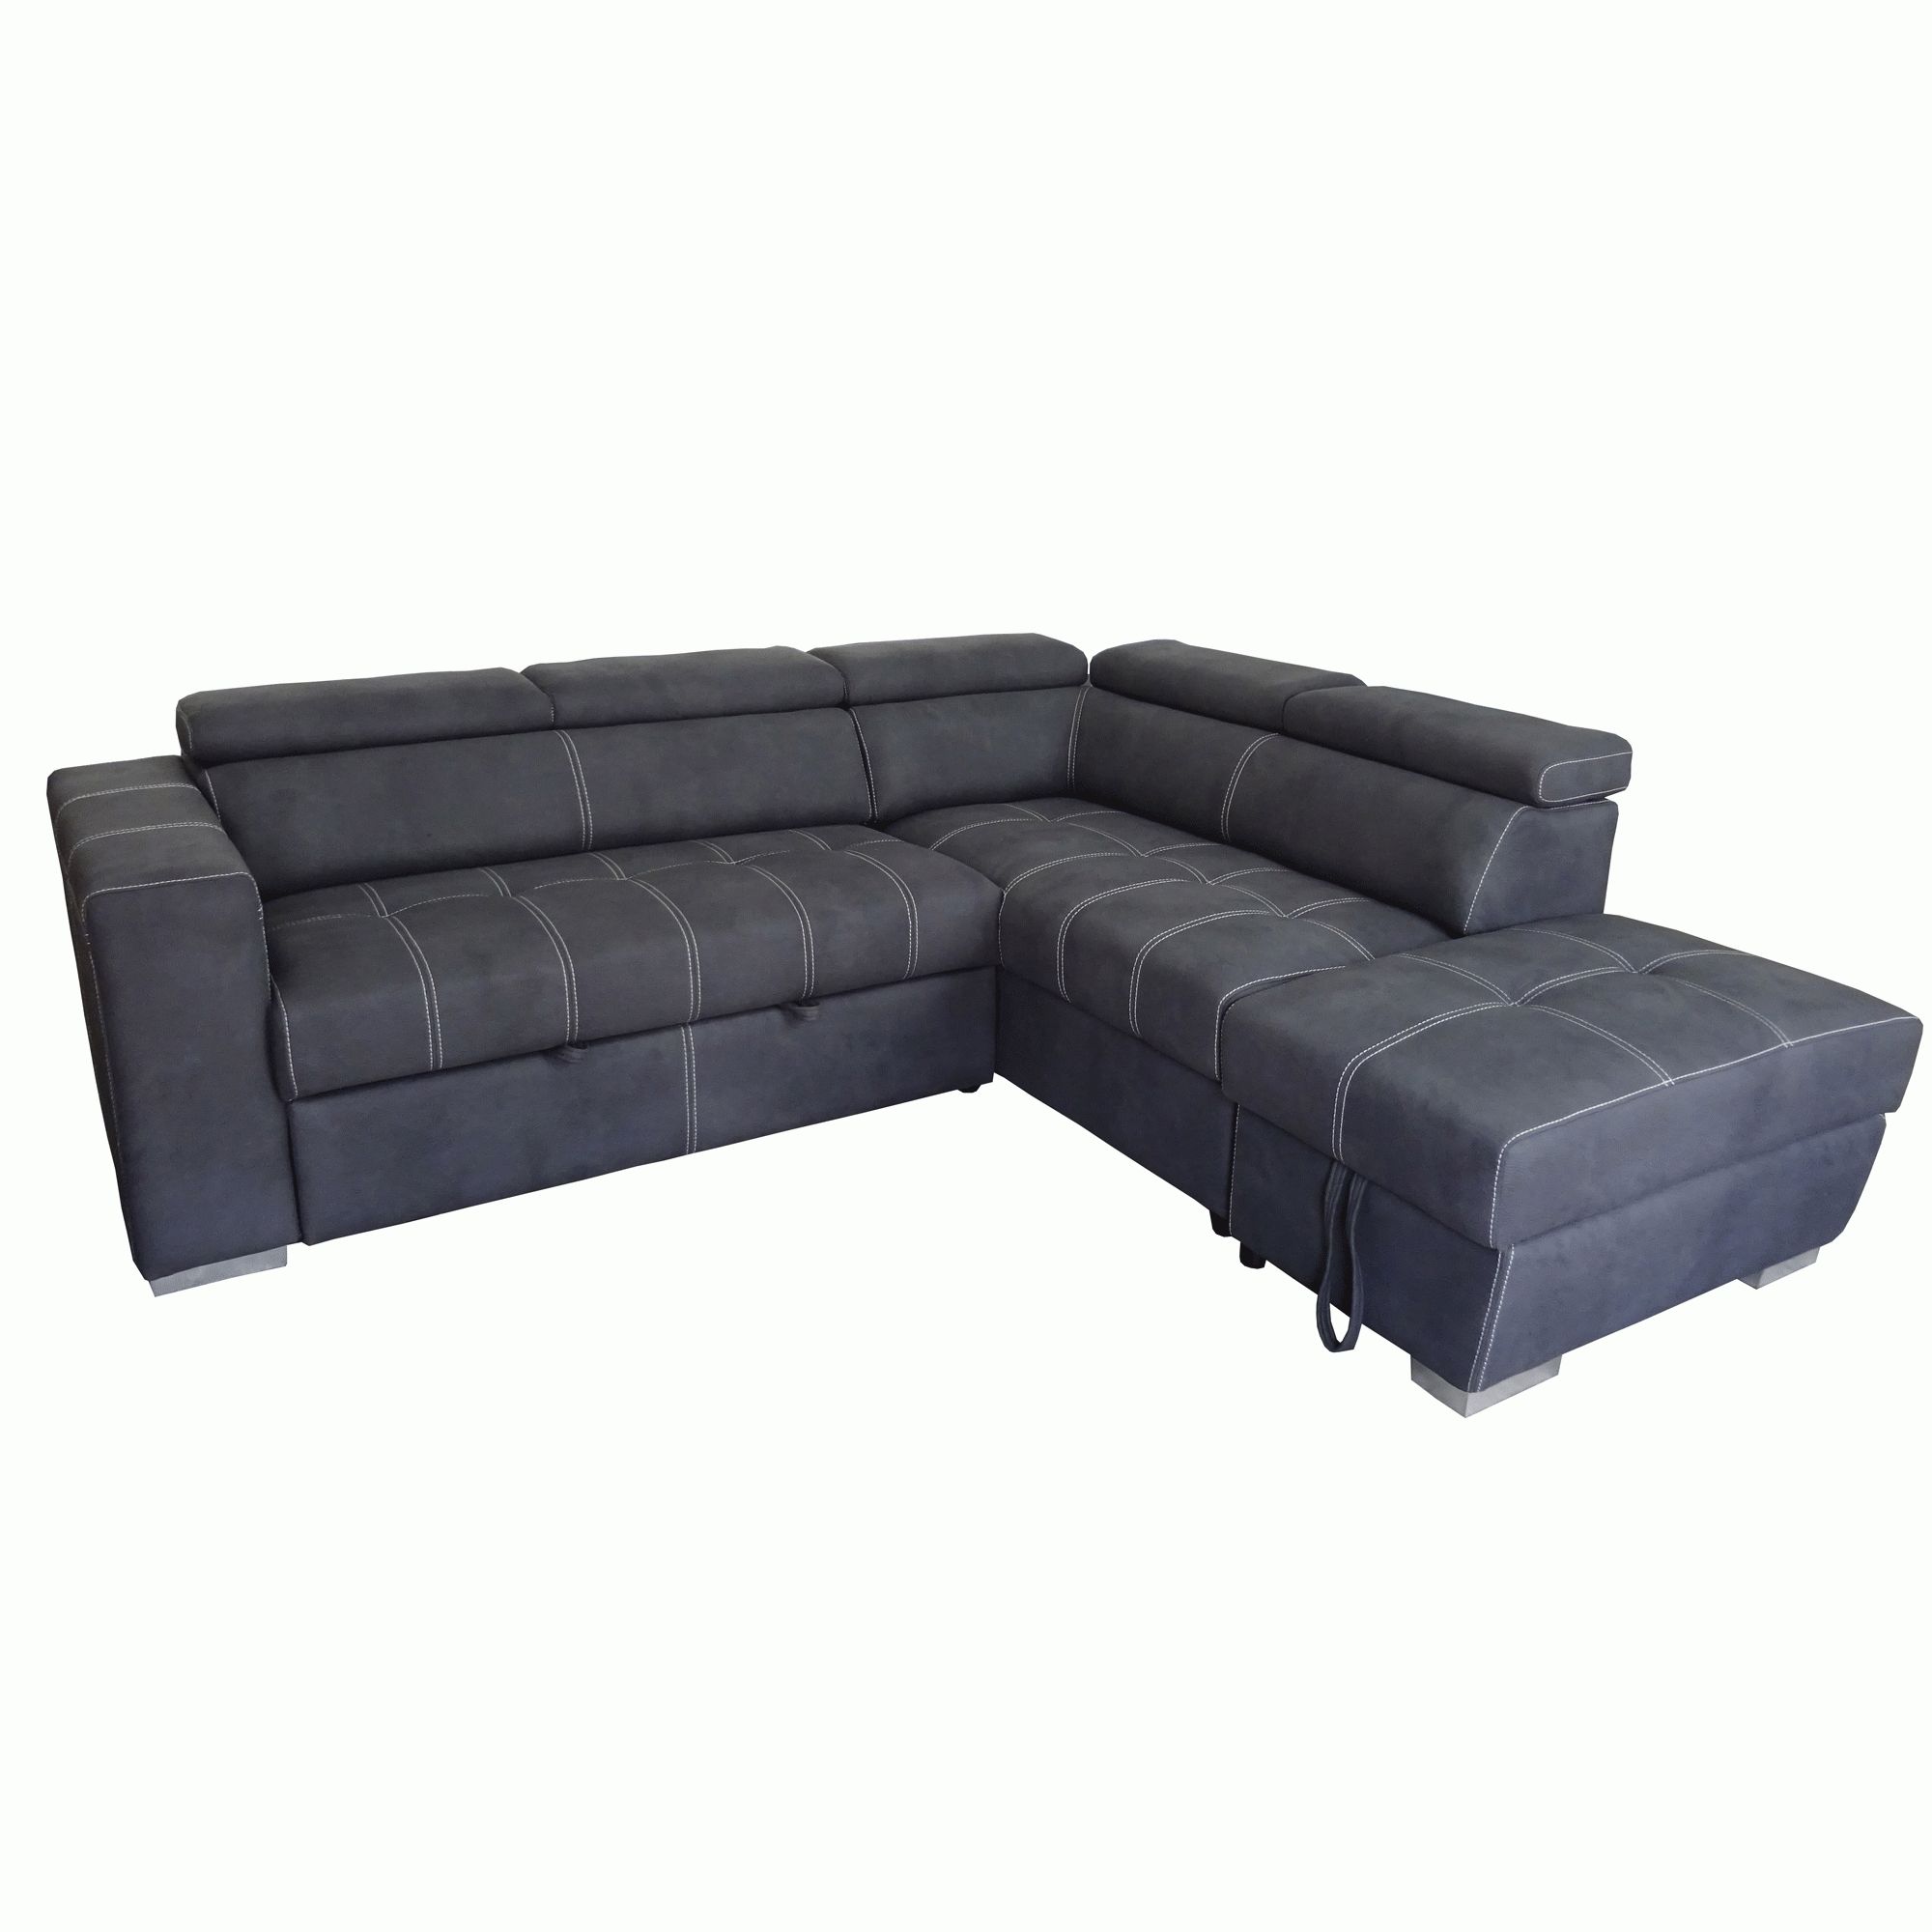 Sectional Sofas | Sectional Couches – Bernie & Phyl's Furniture Regarding Small 2 Piece Sectional Sofas (View 23 of 30)